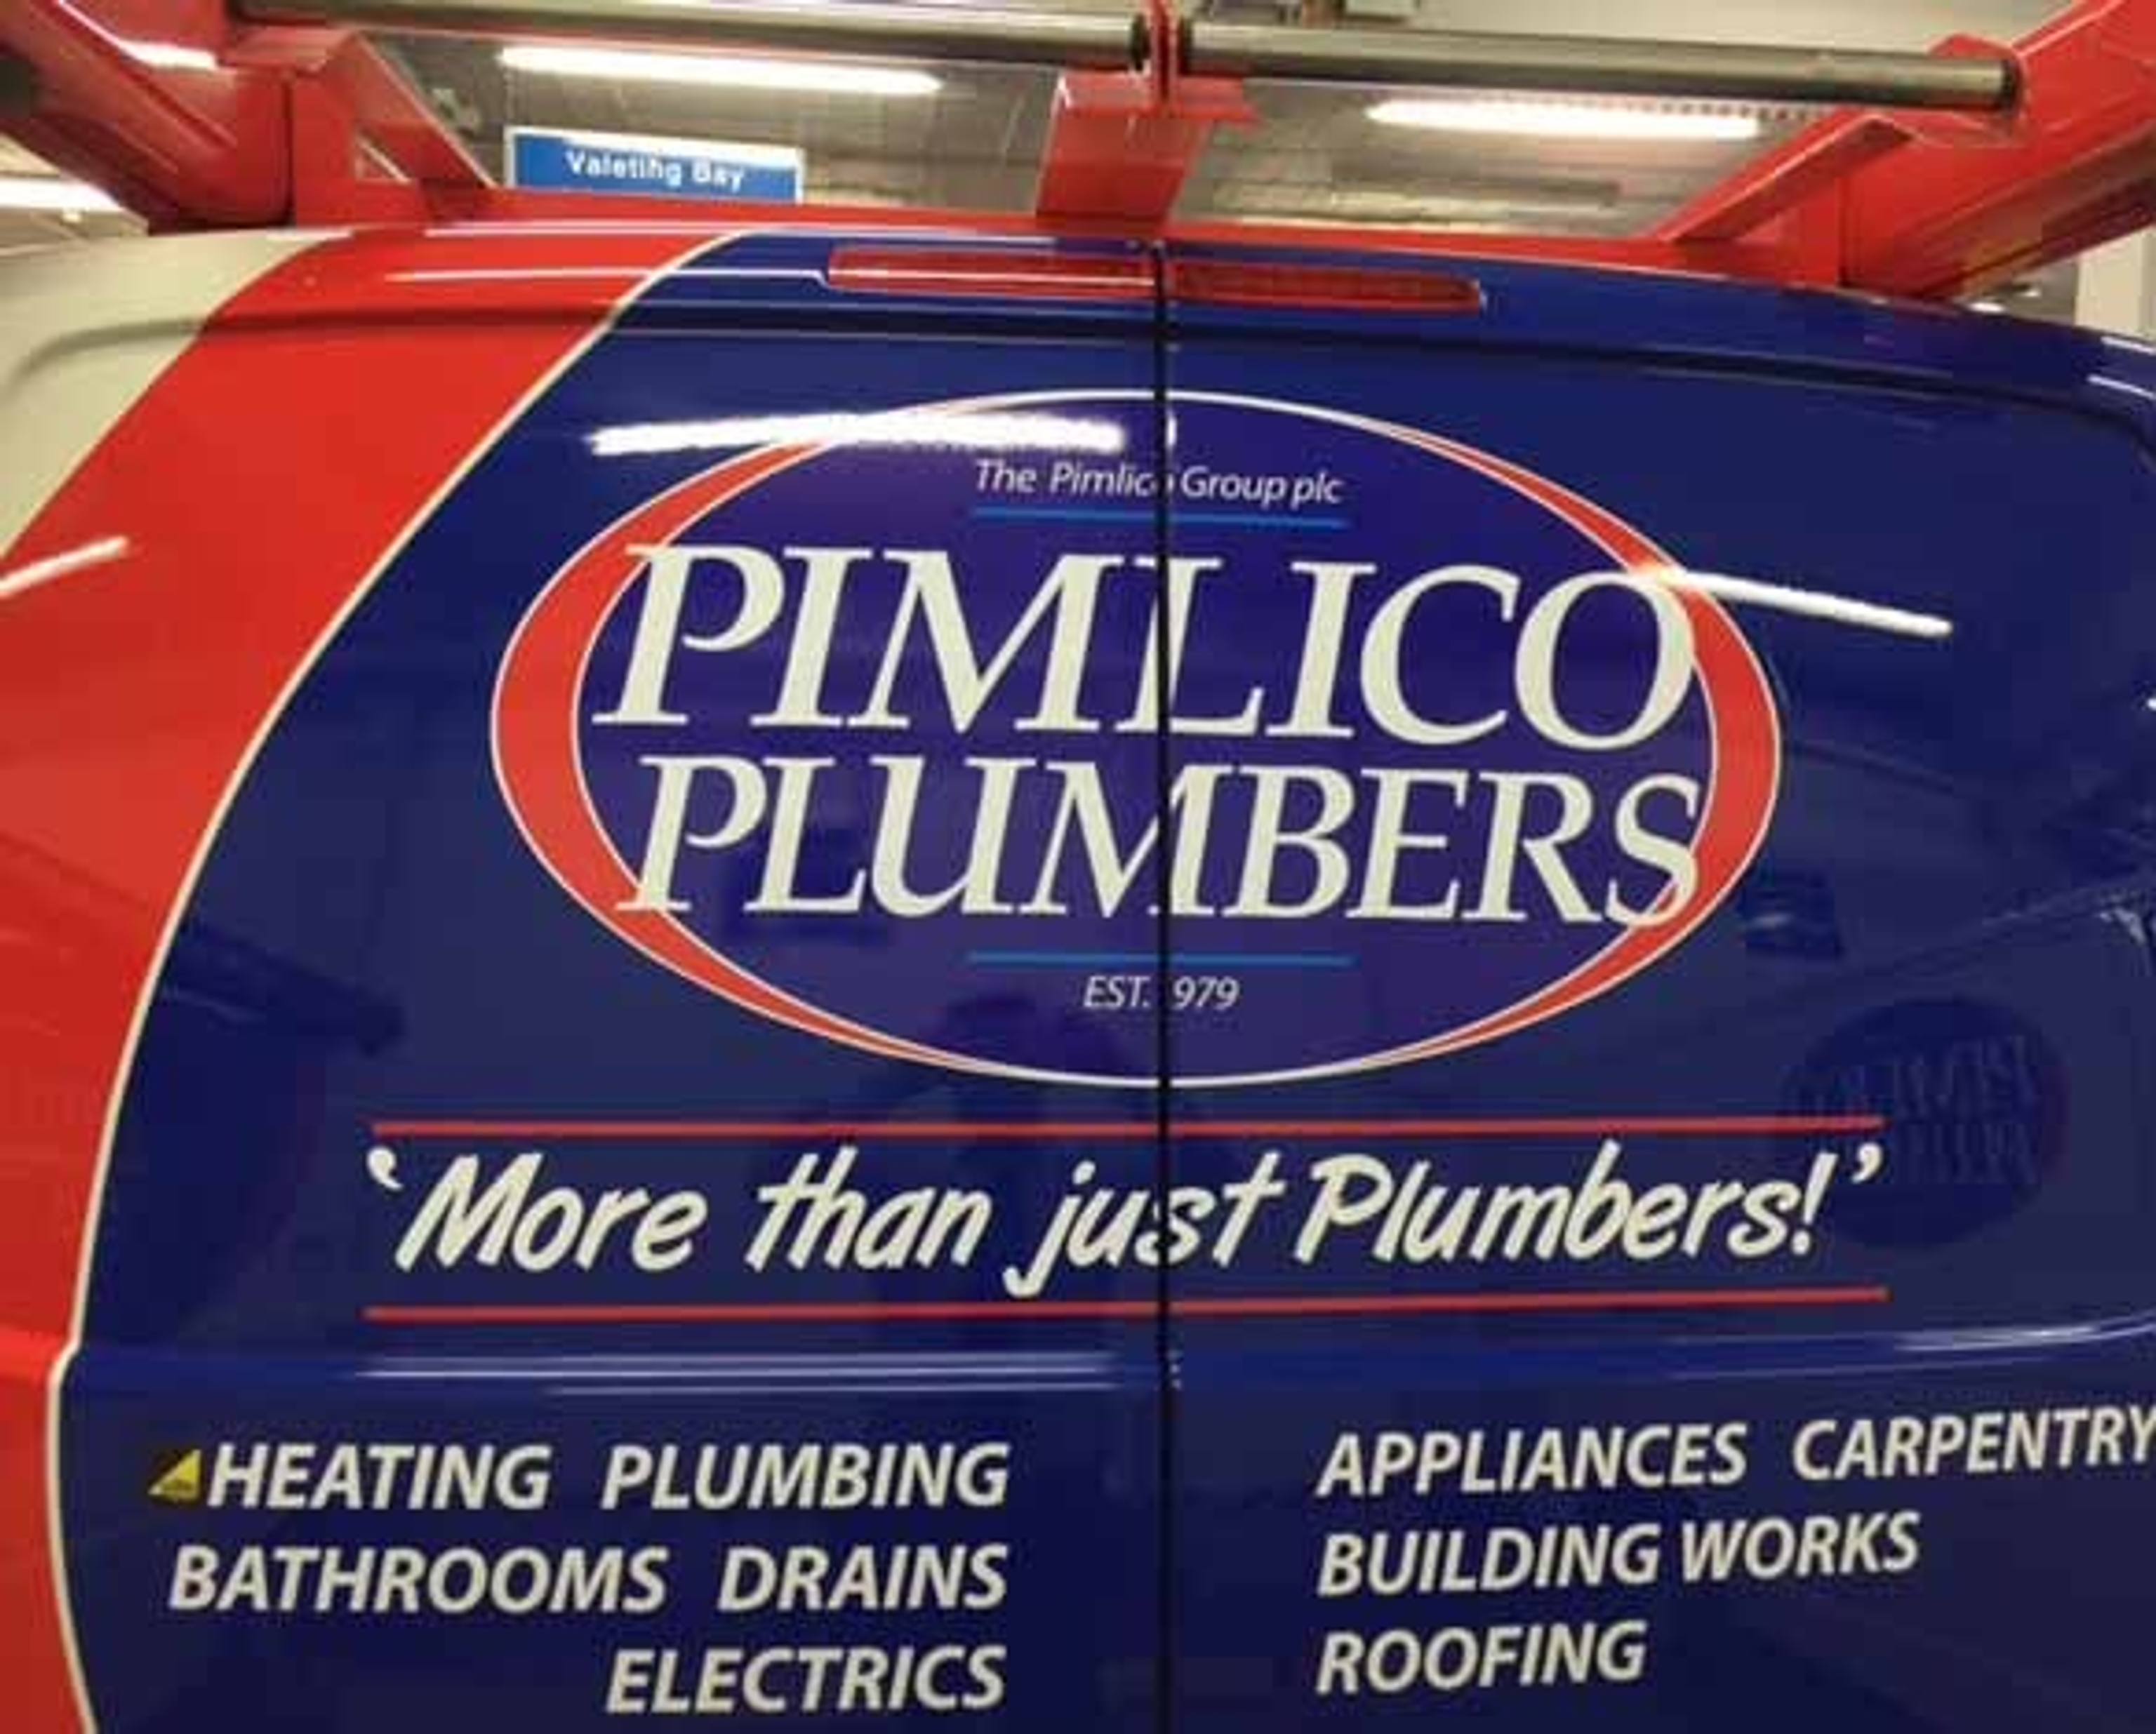 Pimlico Plumbers – Bad names that restricted future growth